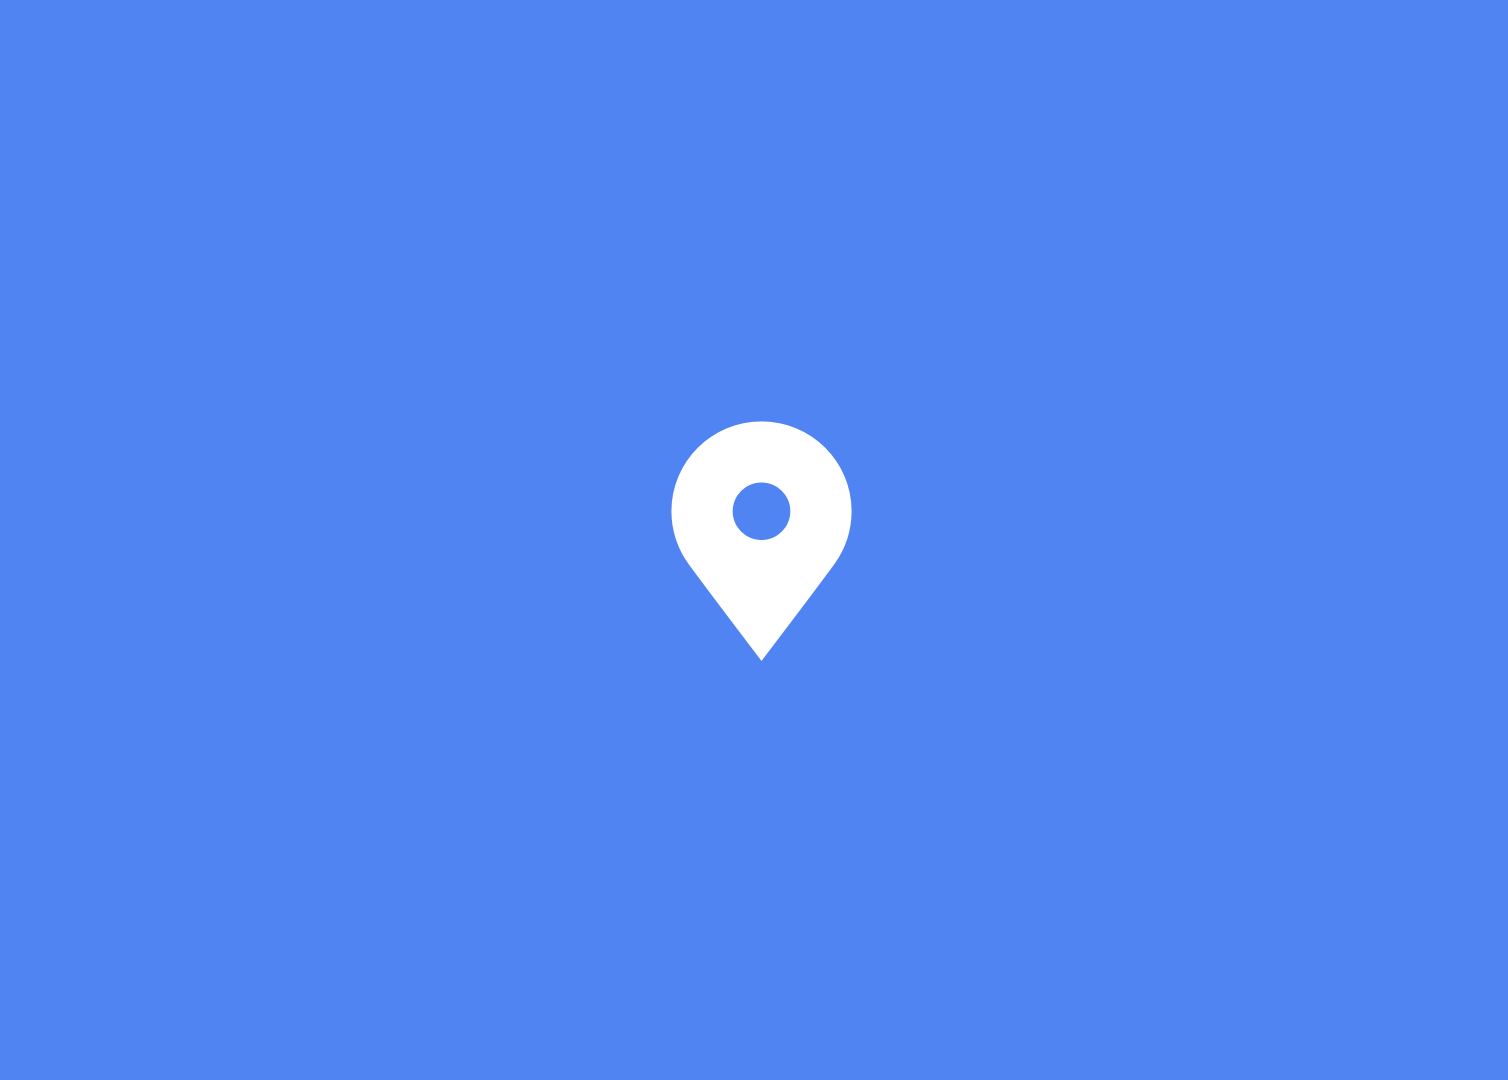 Understanding Updates to Your Device’s Location Settings